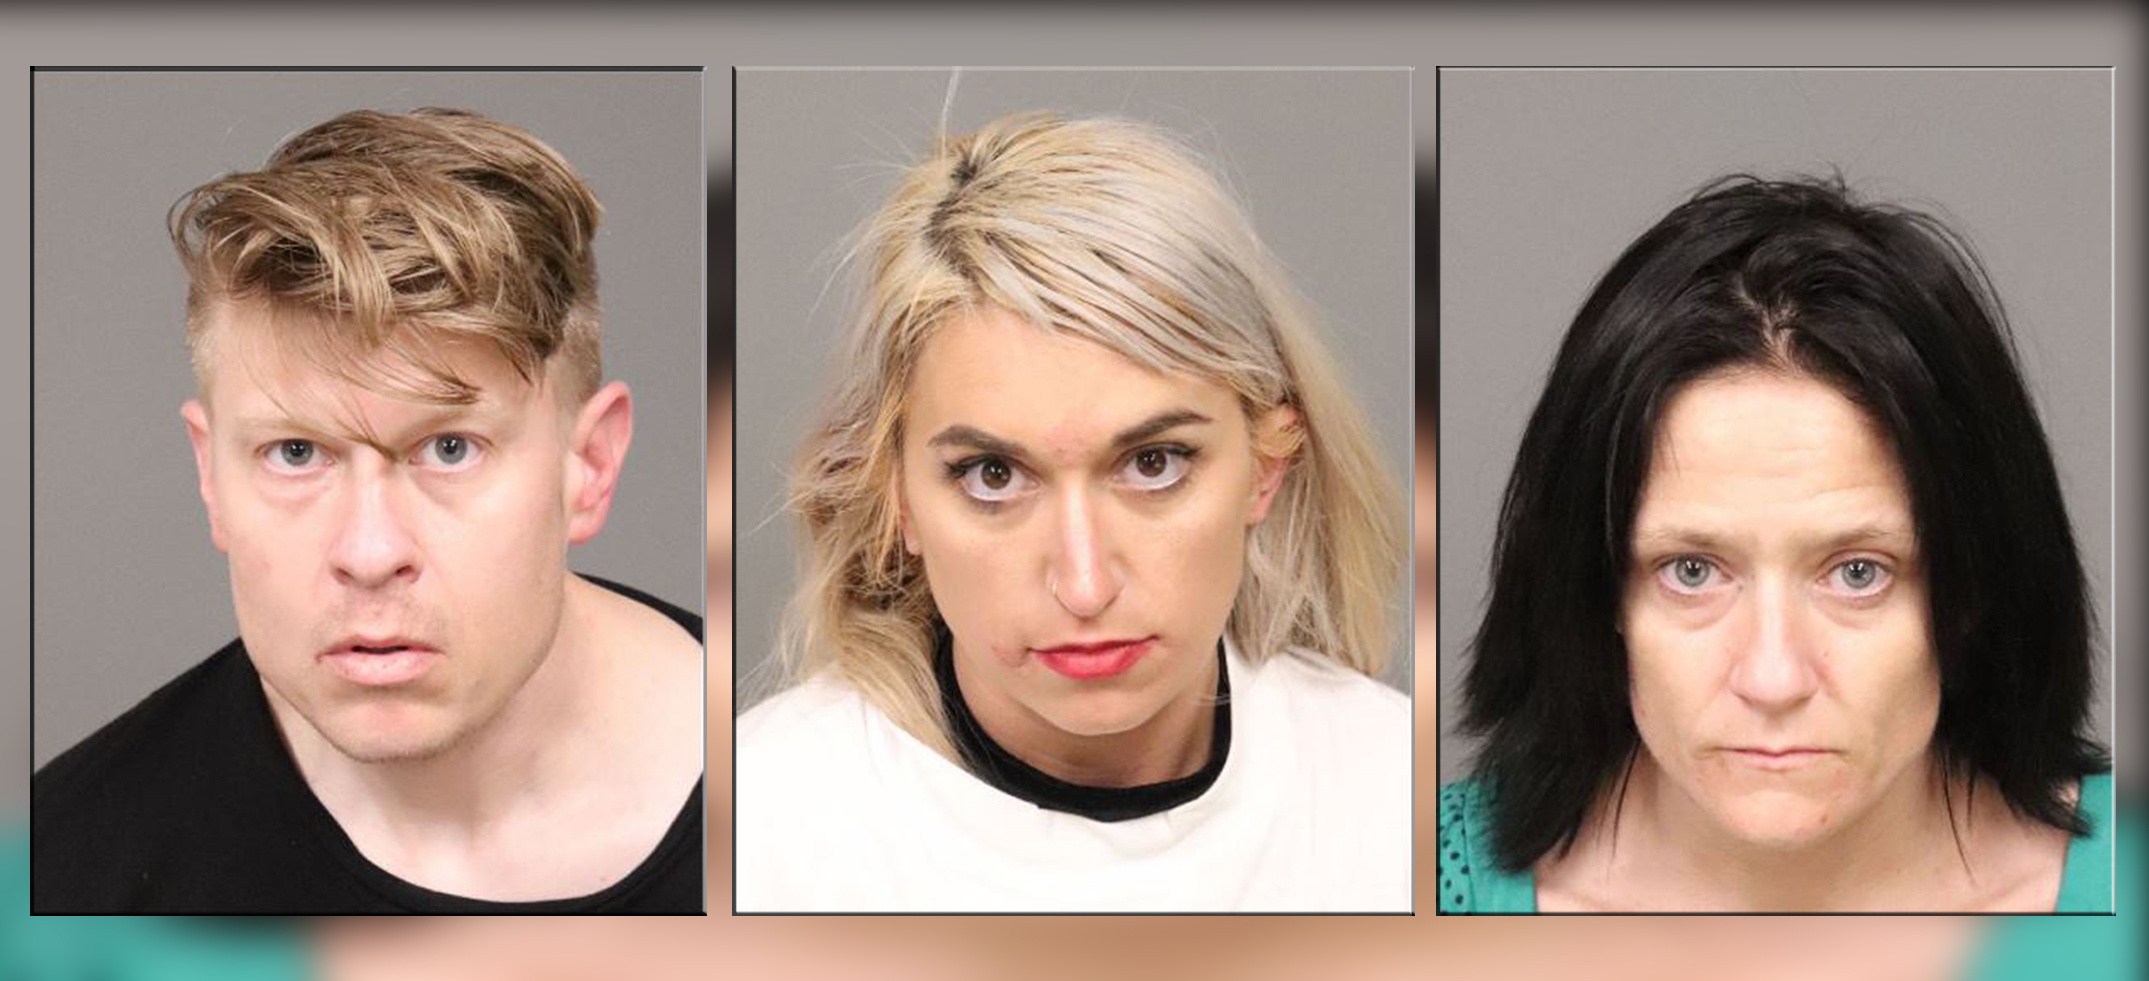 Shawn Matthew Luhm (left, DOB 3/4/1983) Kayla Anne Luhm (center, DOB 6/21/89) and Melissa Dawn Currie (right, DOB 10/11/1984).  Booking photos taken 5/14/2021.